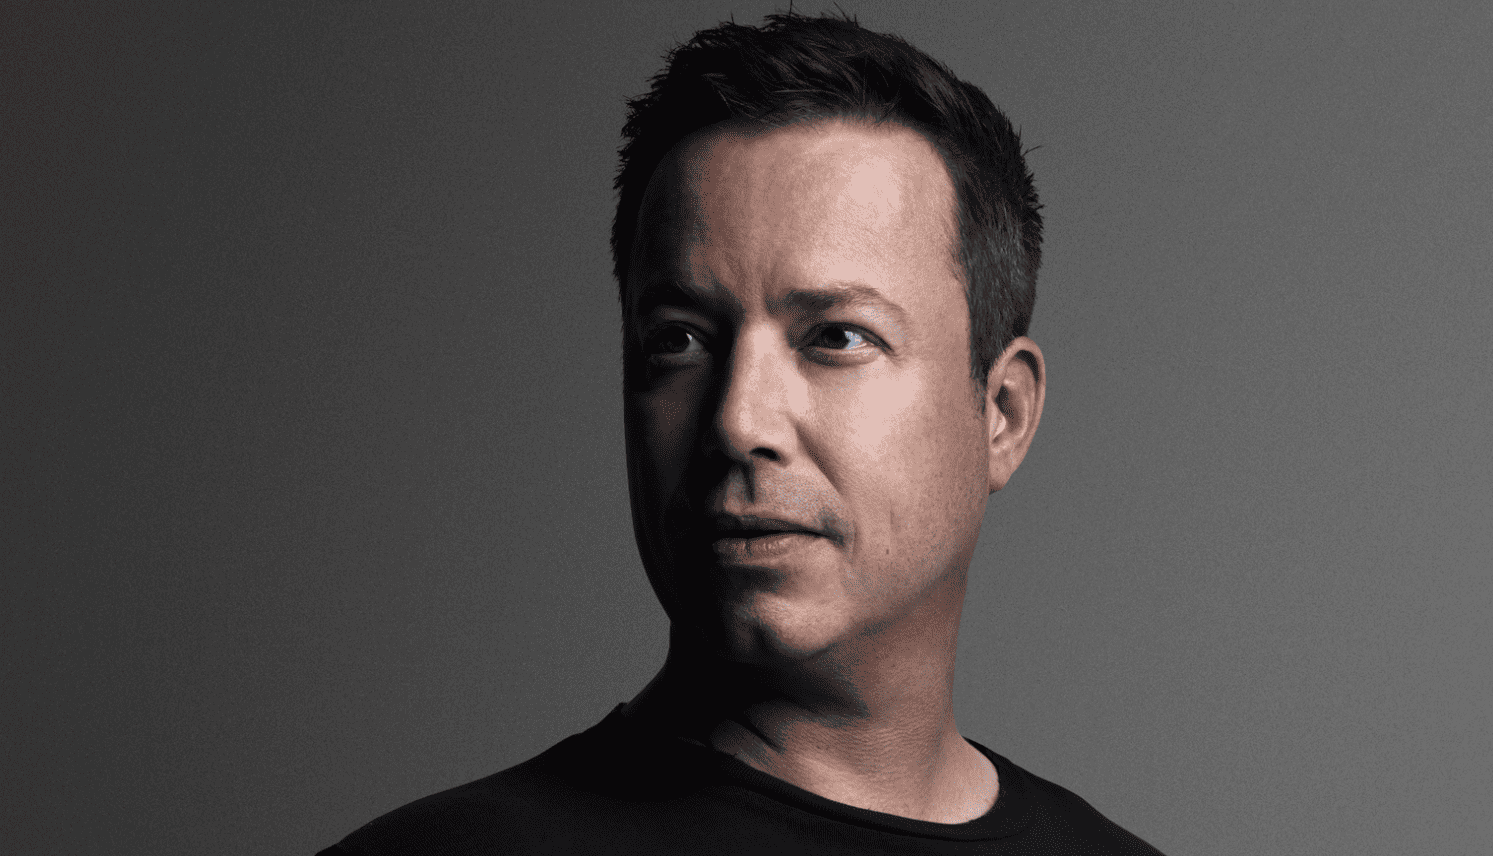 Sander van Doorn is ‘On A Roll’ with new release on Future Rave label: Listen